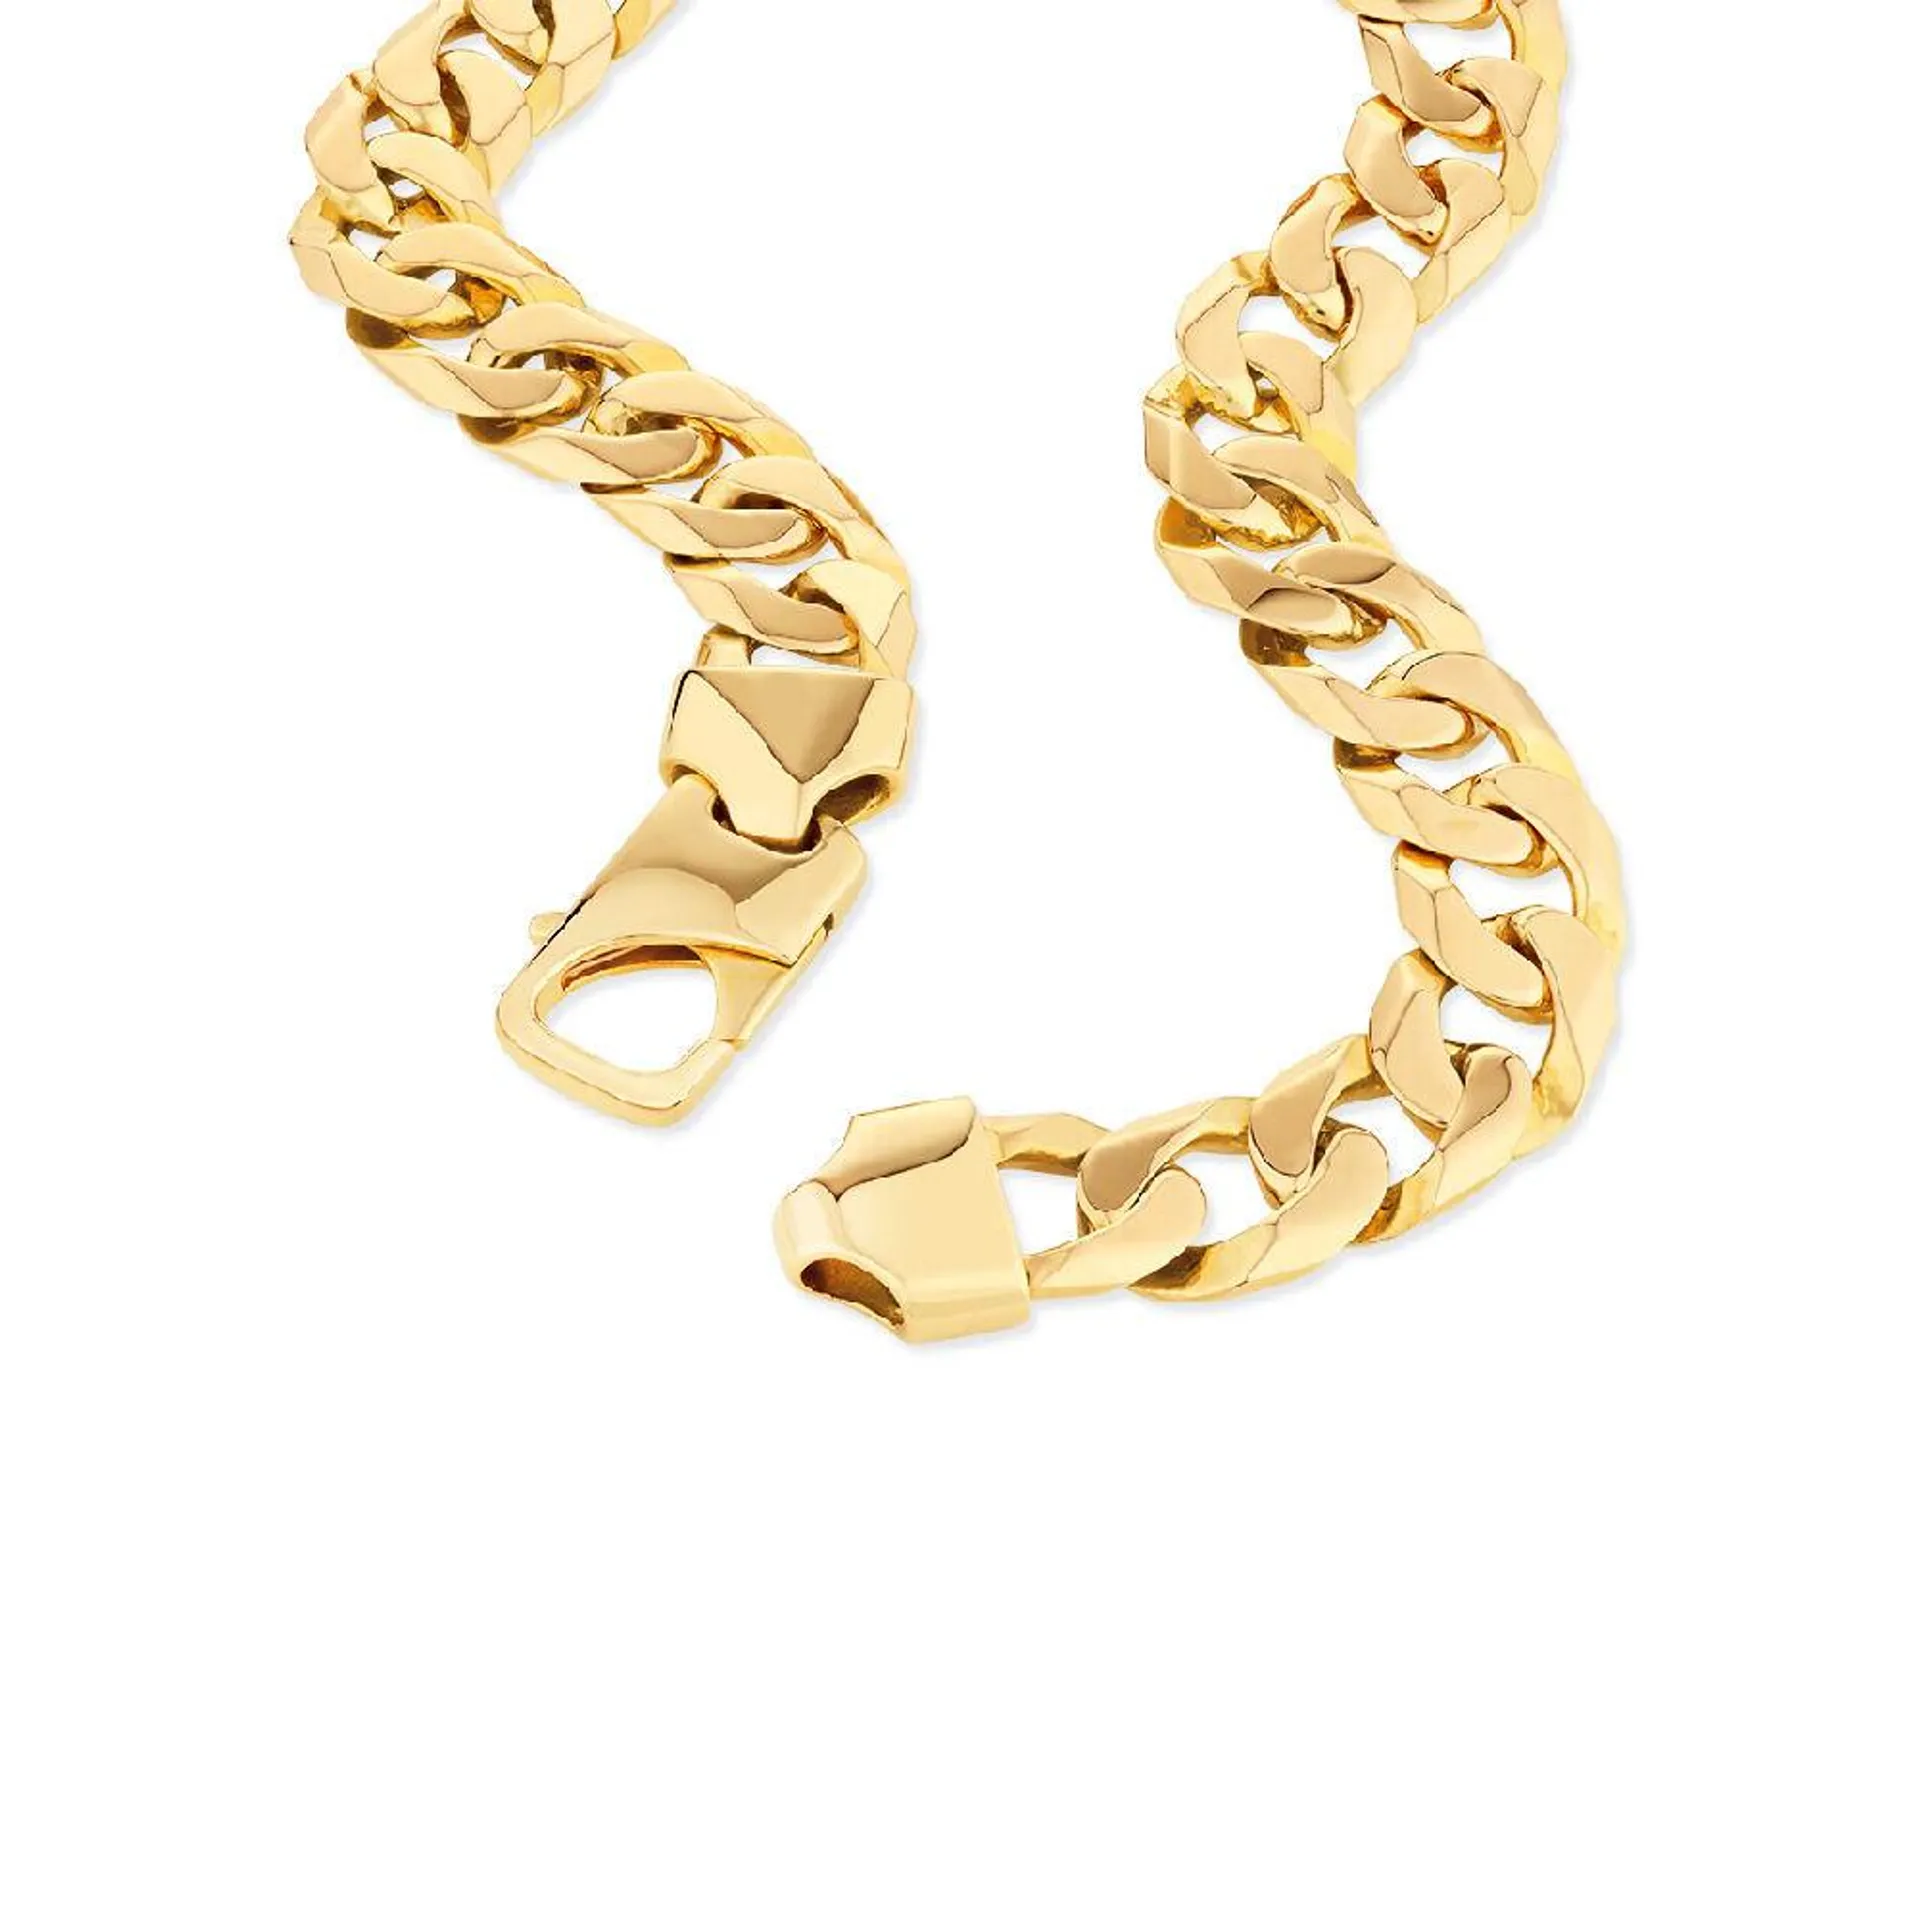 55cm (22") Solid Curb Chain in 10kt Yellow Gold